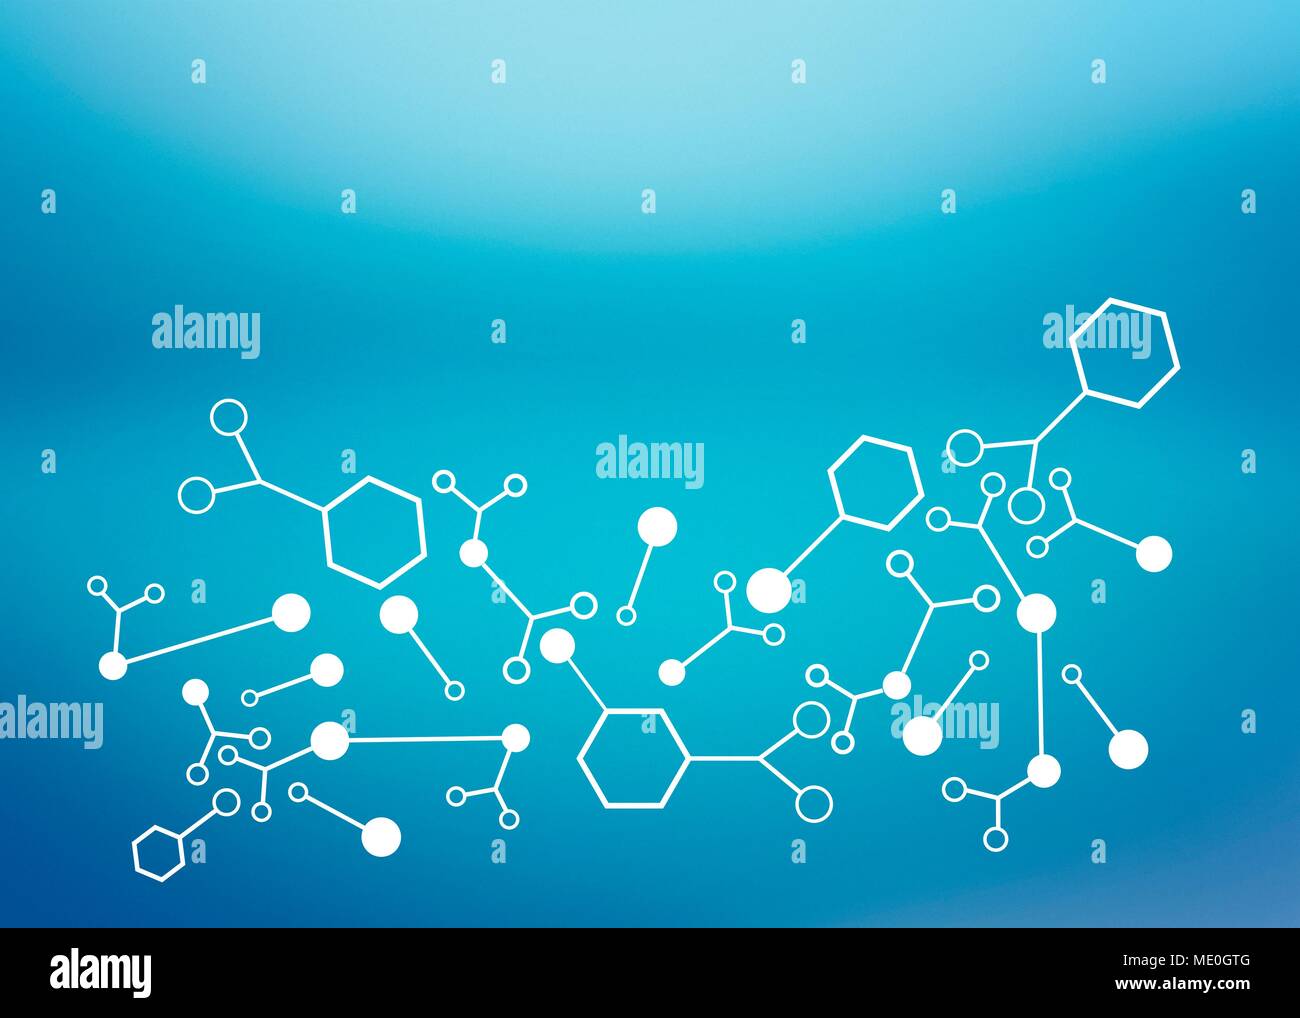 Abstract background with molecule icons, illustration. Stock Photo